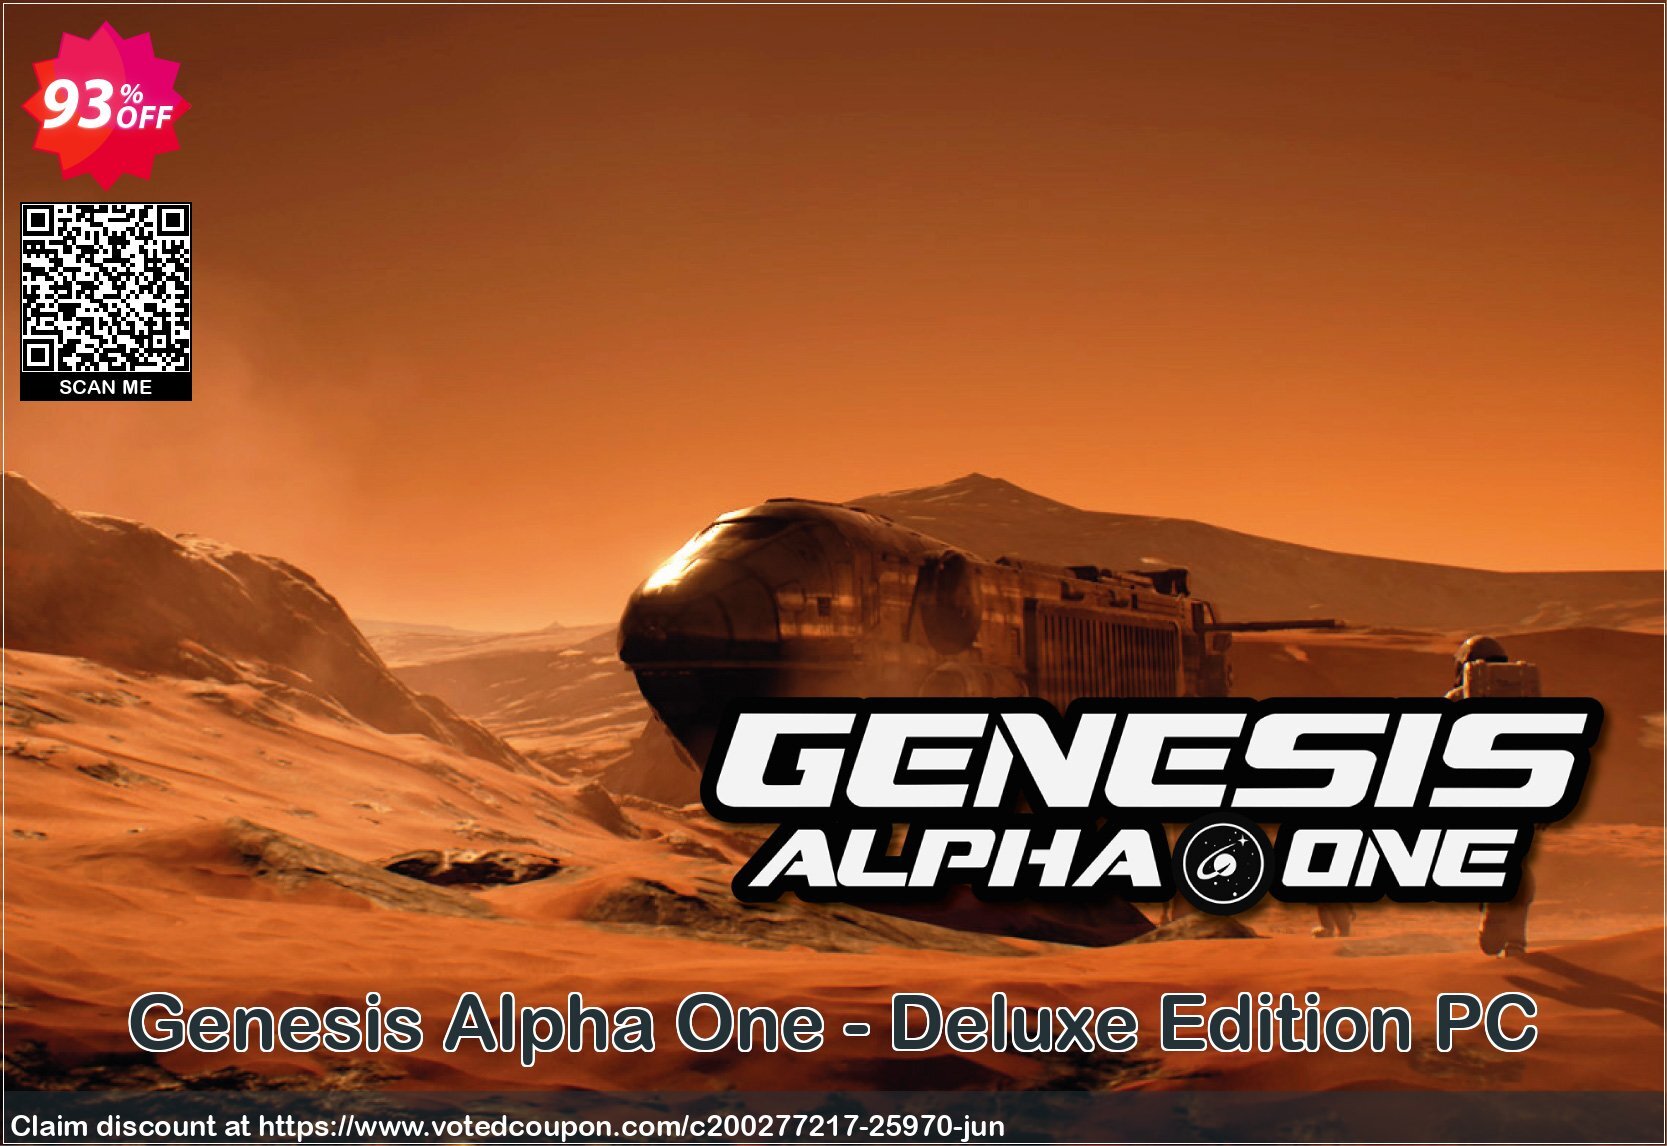 Genesis Alpha One - Deluxe Edition PC Coupon, discount Genesis Alpha One - Deluxe Edition PC Deal. Promotion: Genesis Alpha One - Deluxe Edition PC Exclusive offer 